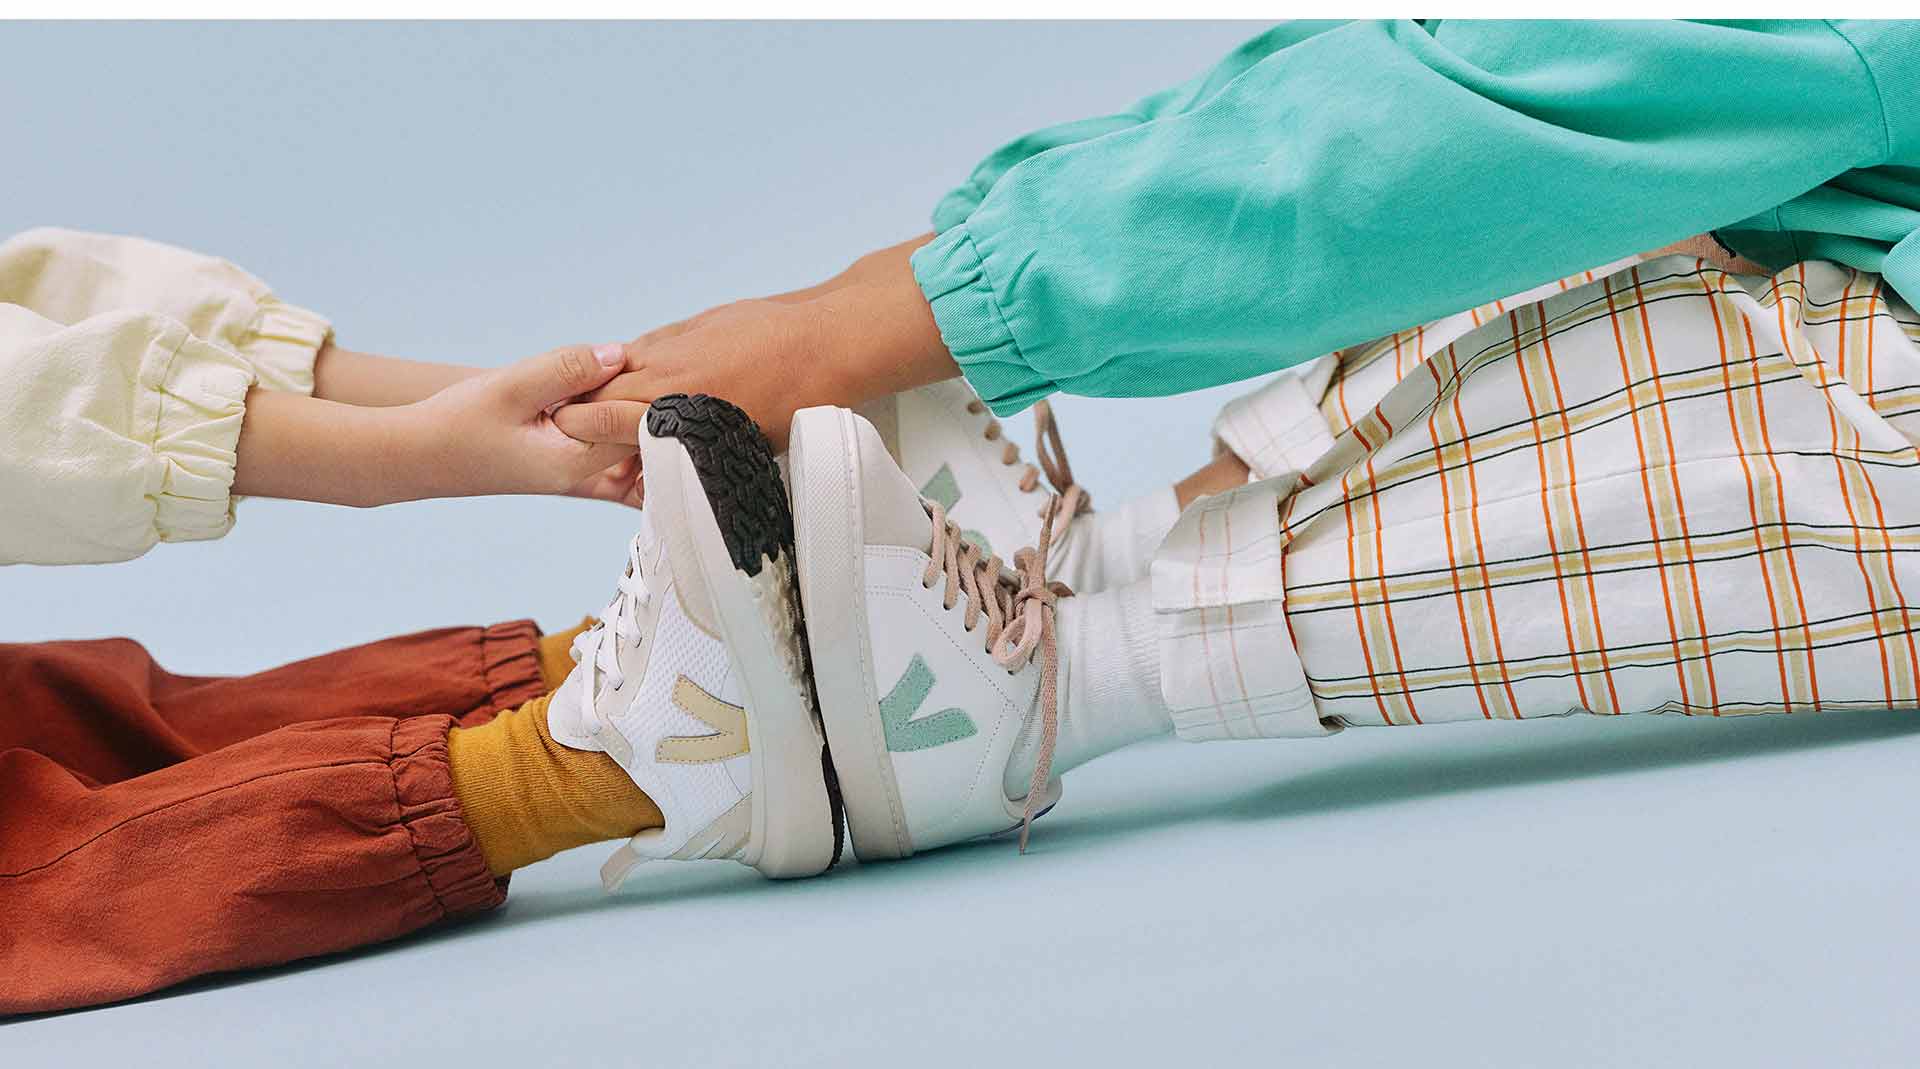 Focus on the hands of two children wearing Veja sneakers